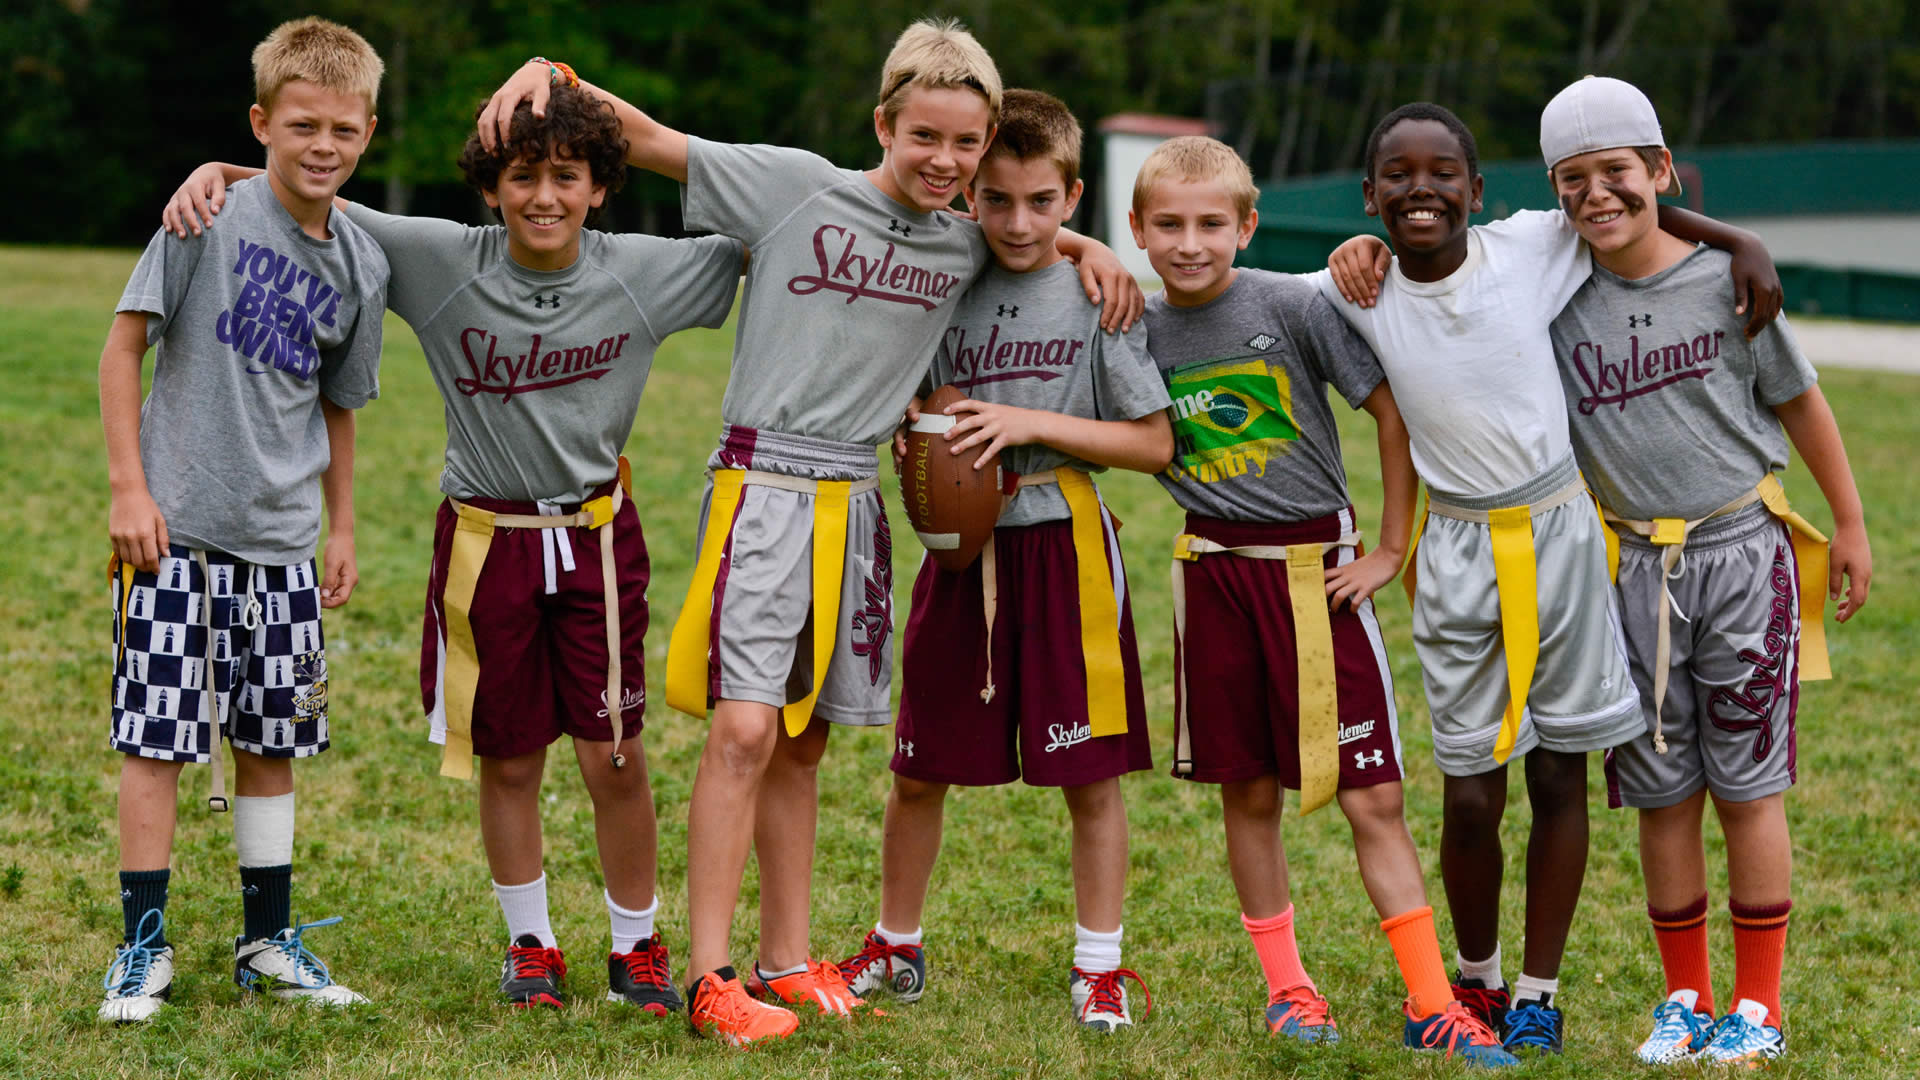 Football at the Best Boys and Summer Camp - Camp Skylemar